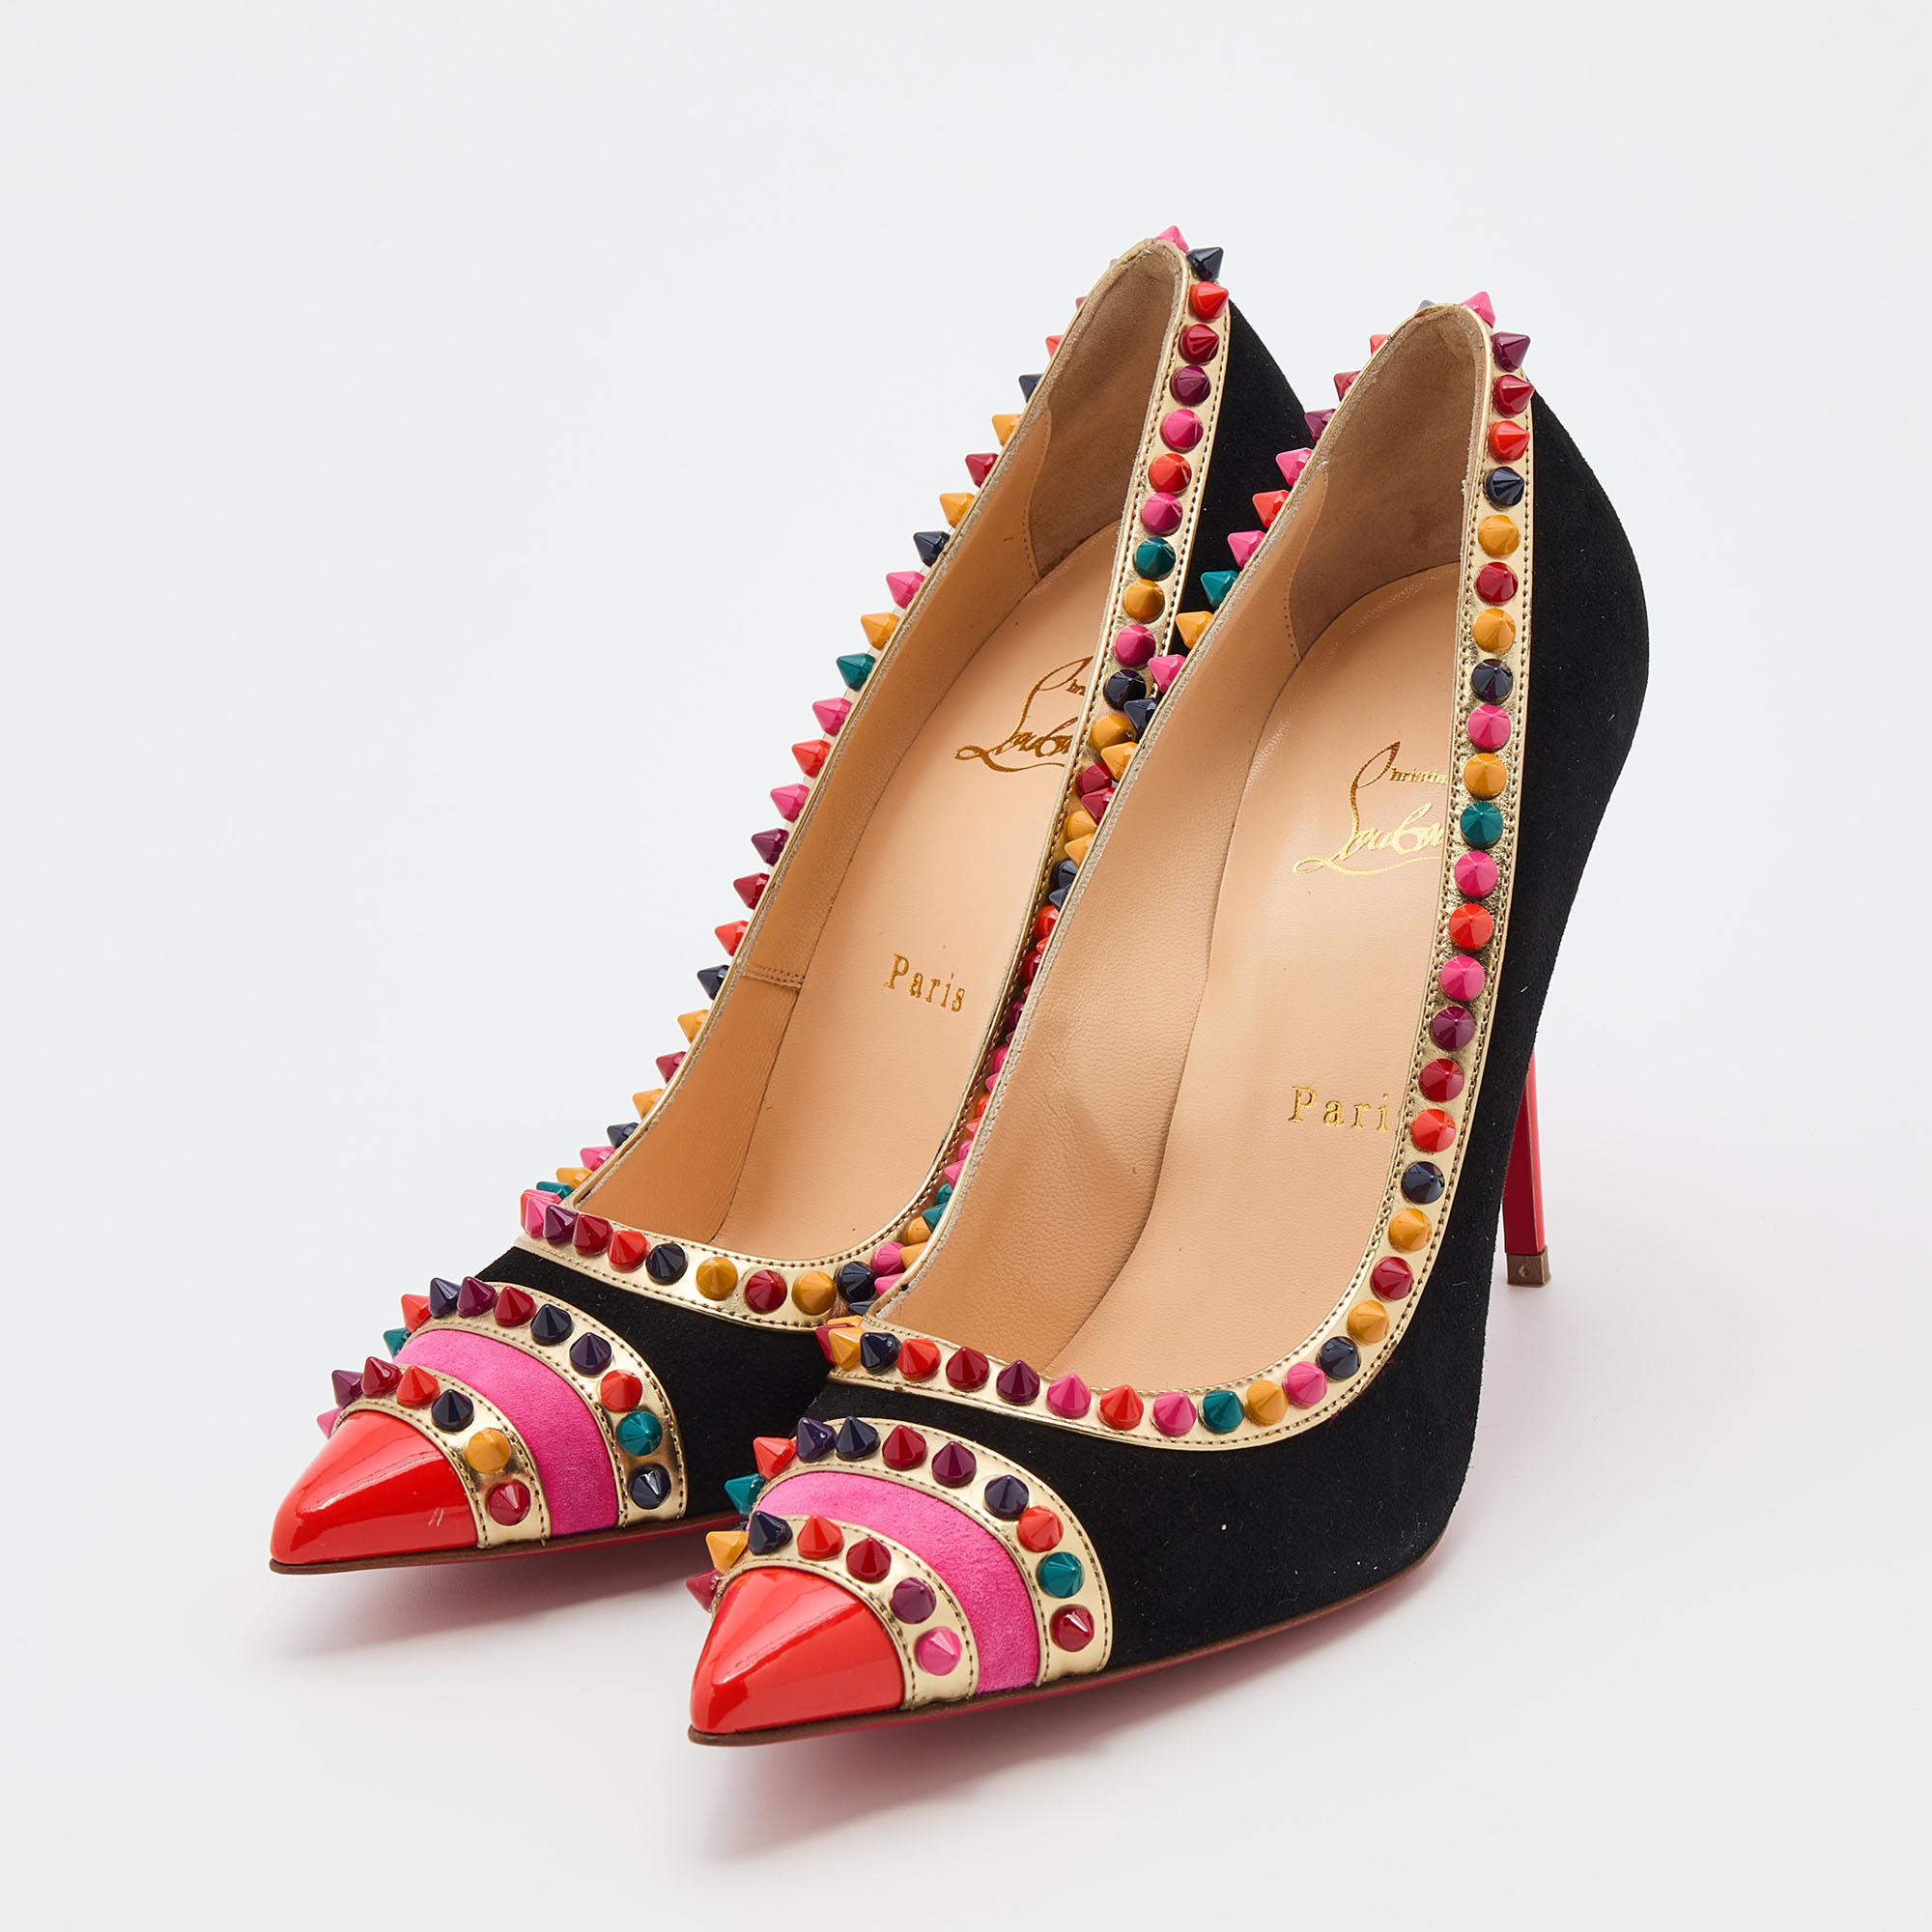 

Christian Louboutin Multicolor Suede And Leather Malabar Hill Spiked Pumps Size